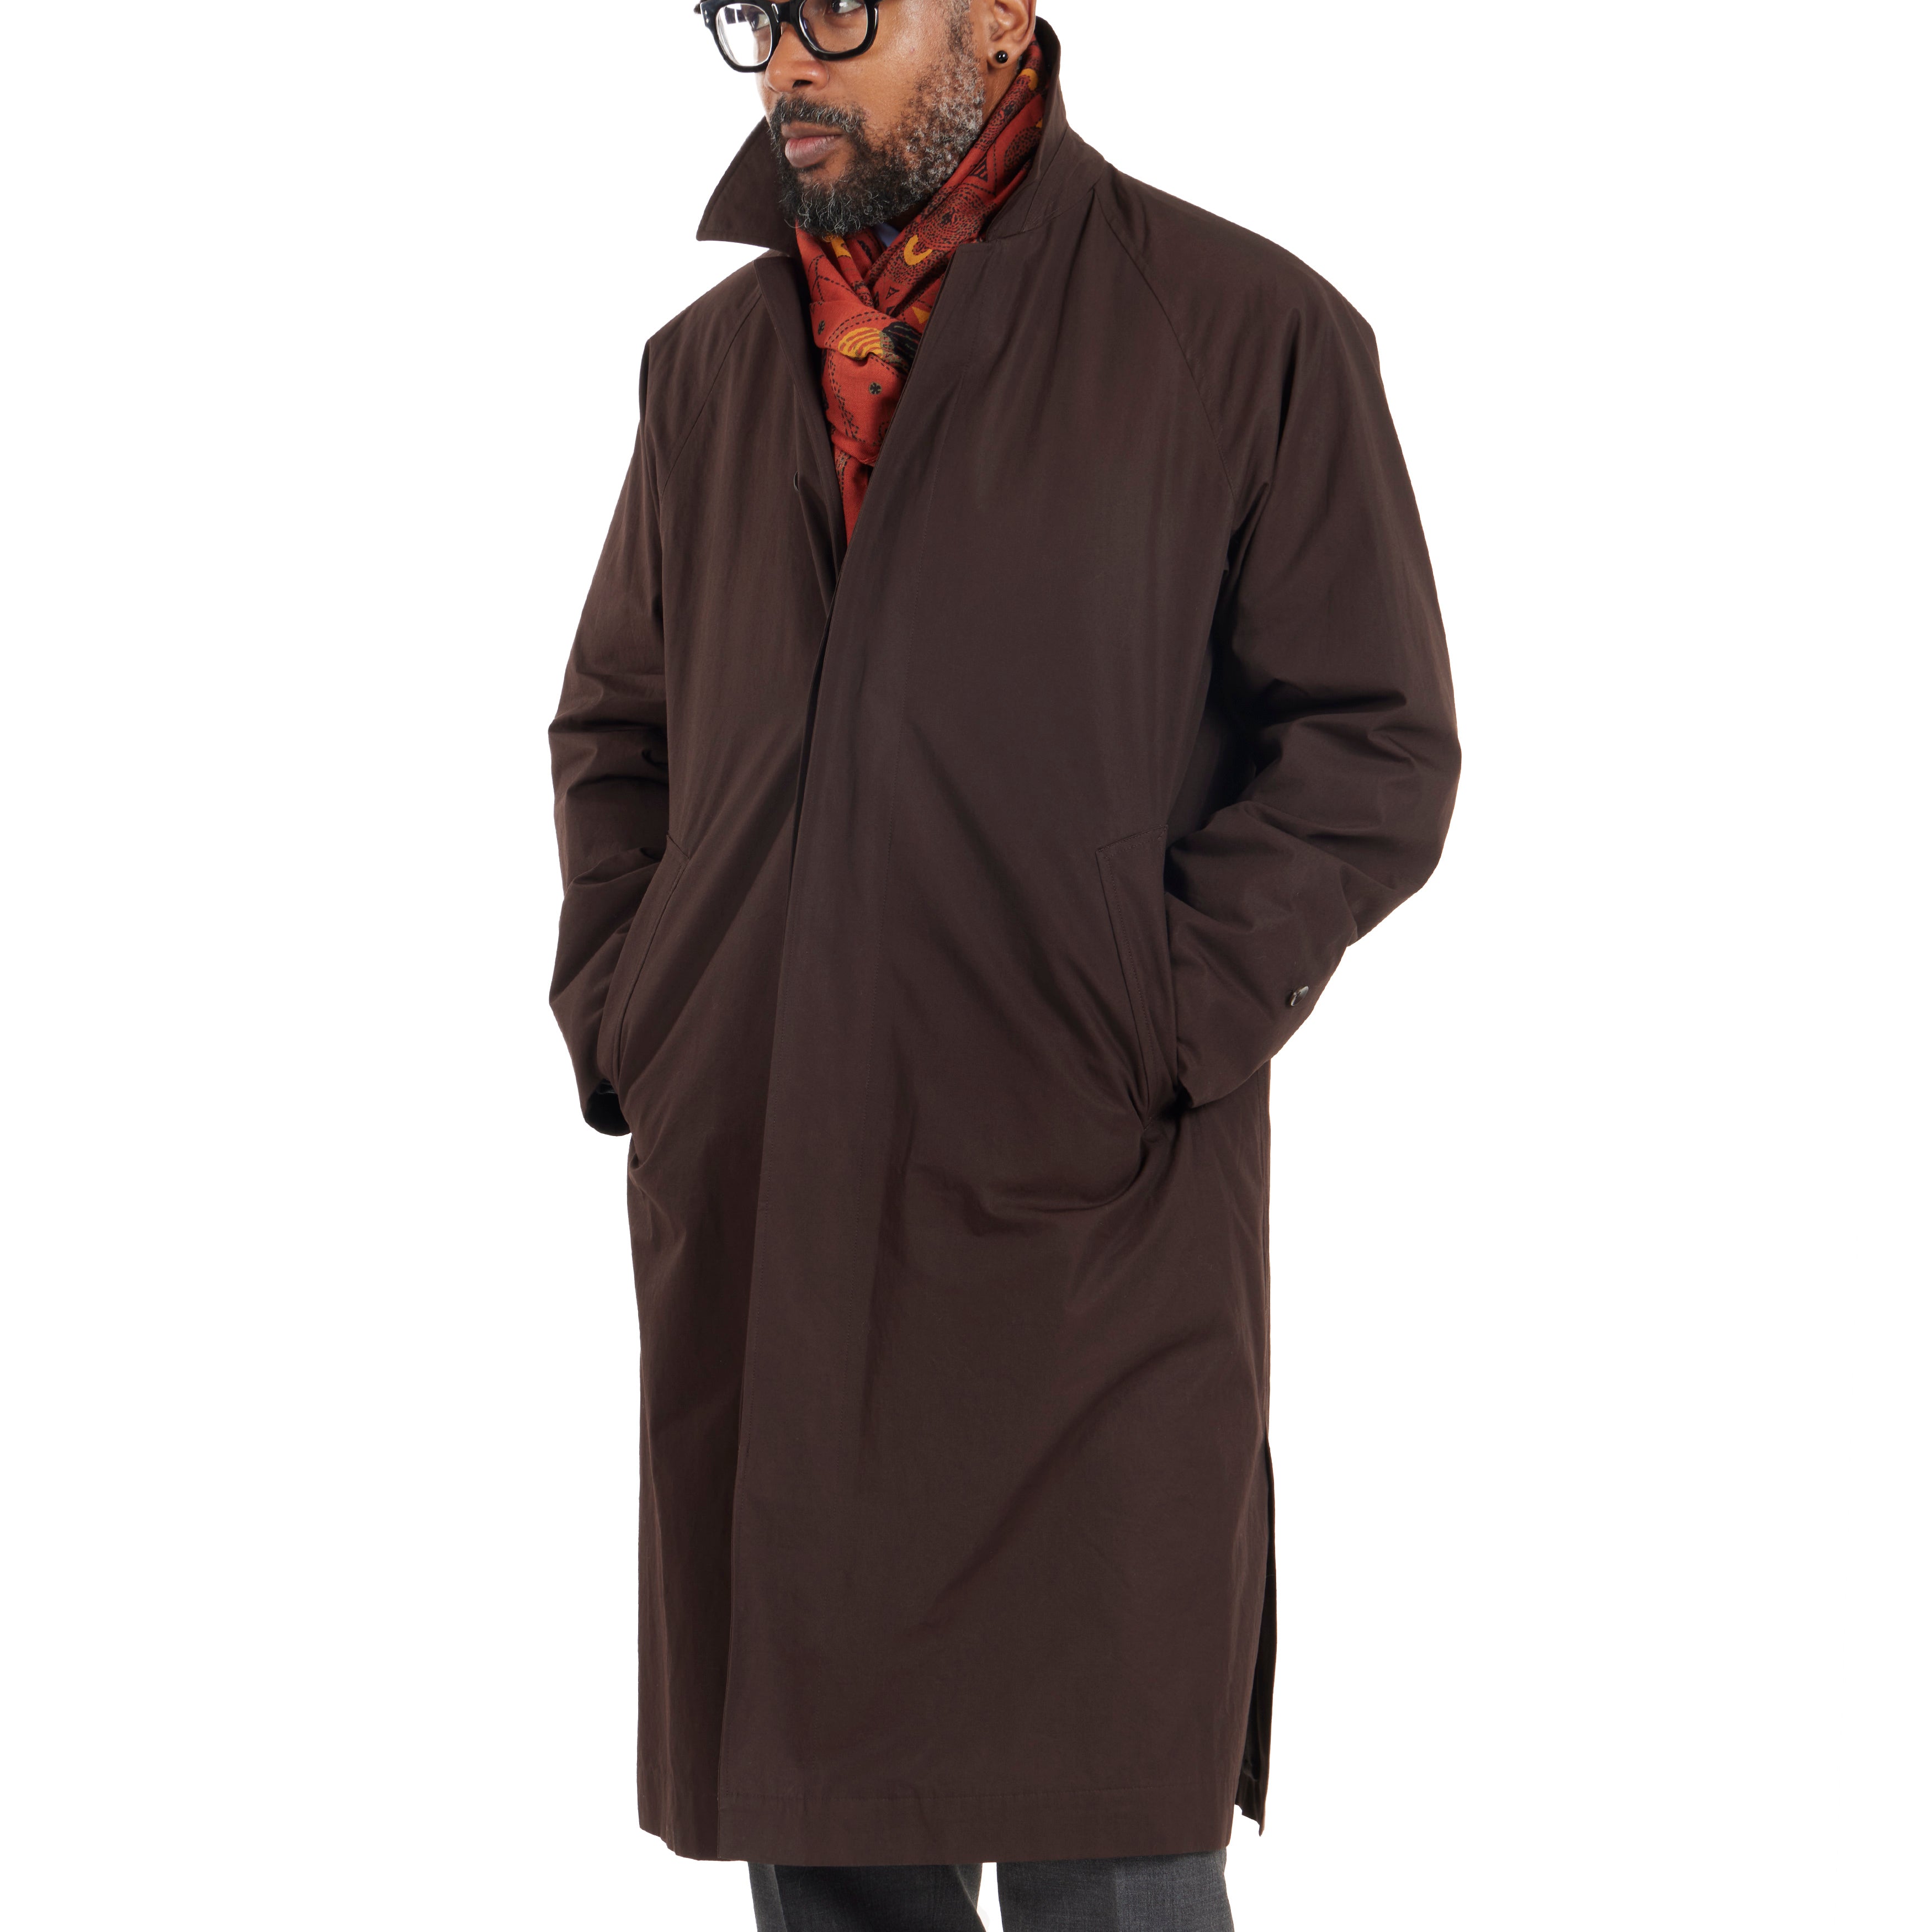 Ruiz Weather Resistant Cashmere Lined Coat - The Armoury